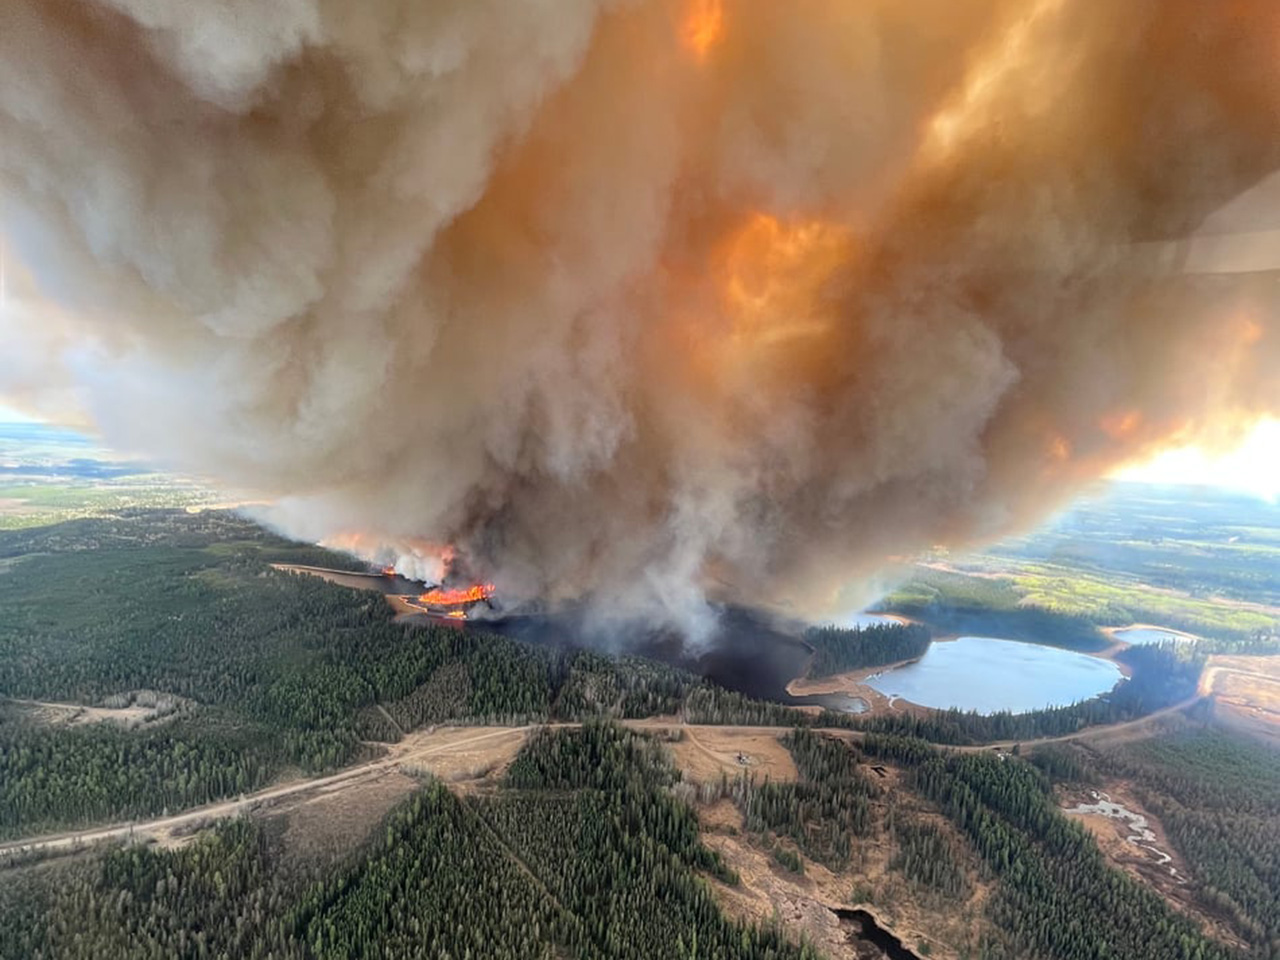 Smoke from an out-of-control fire near Lodgepole, Alta. An out-of-control wildfire has caused thousands of people to flee their homes in Drayton Valley, Alta., and the surrounding rural area. 